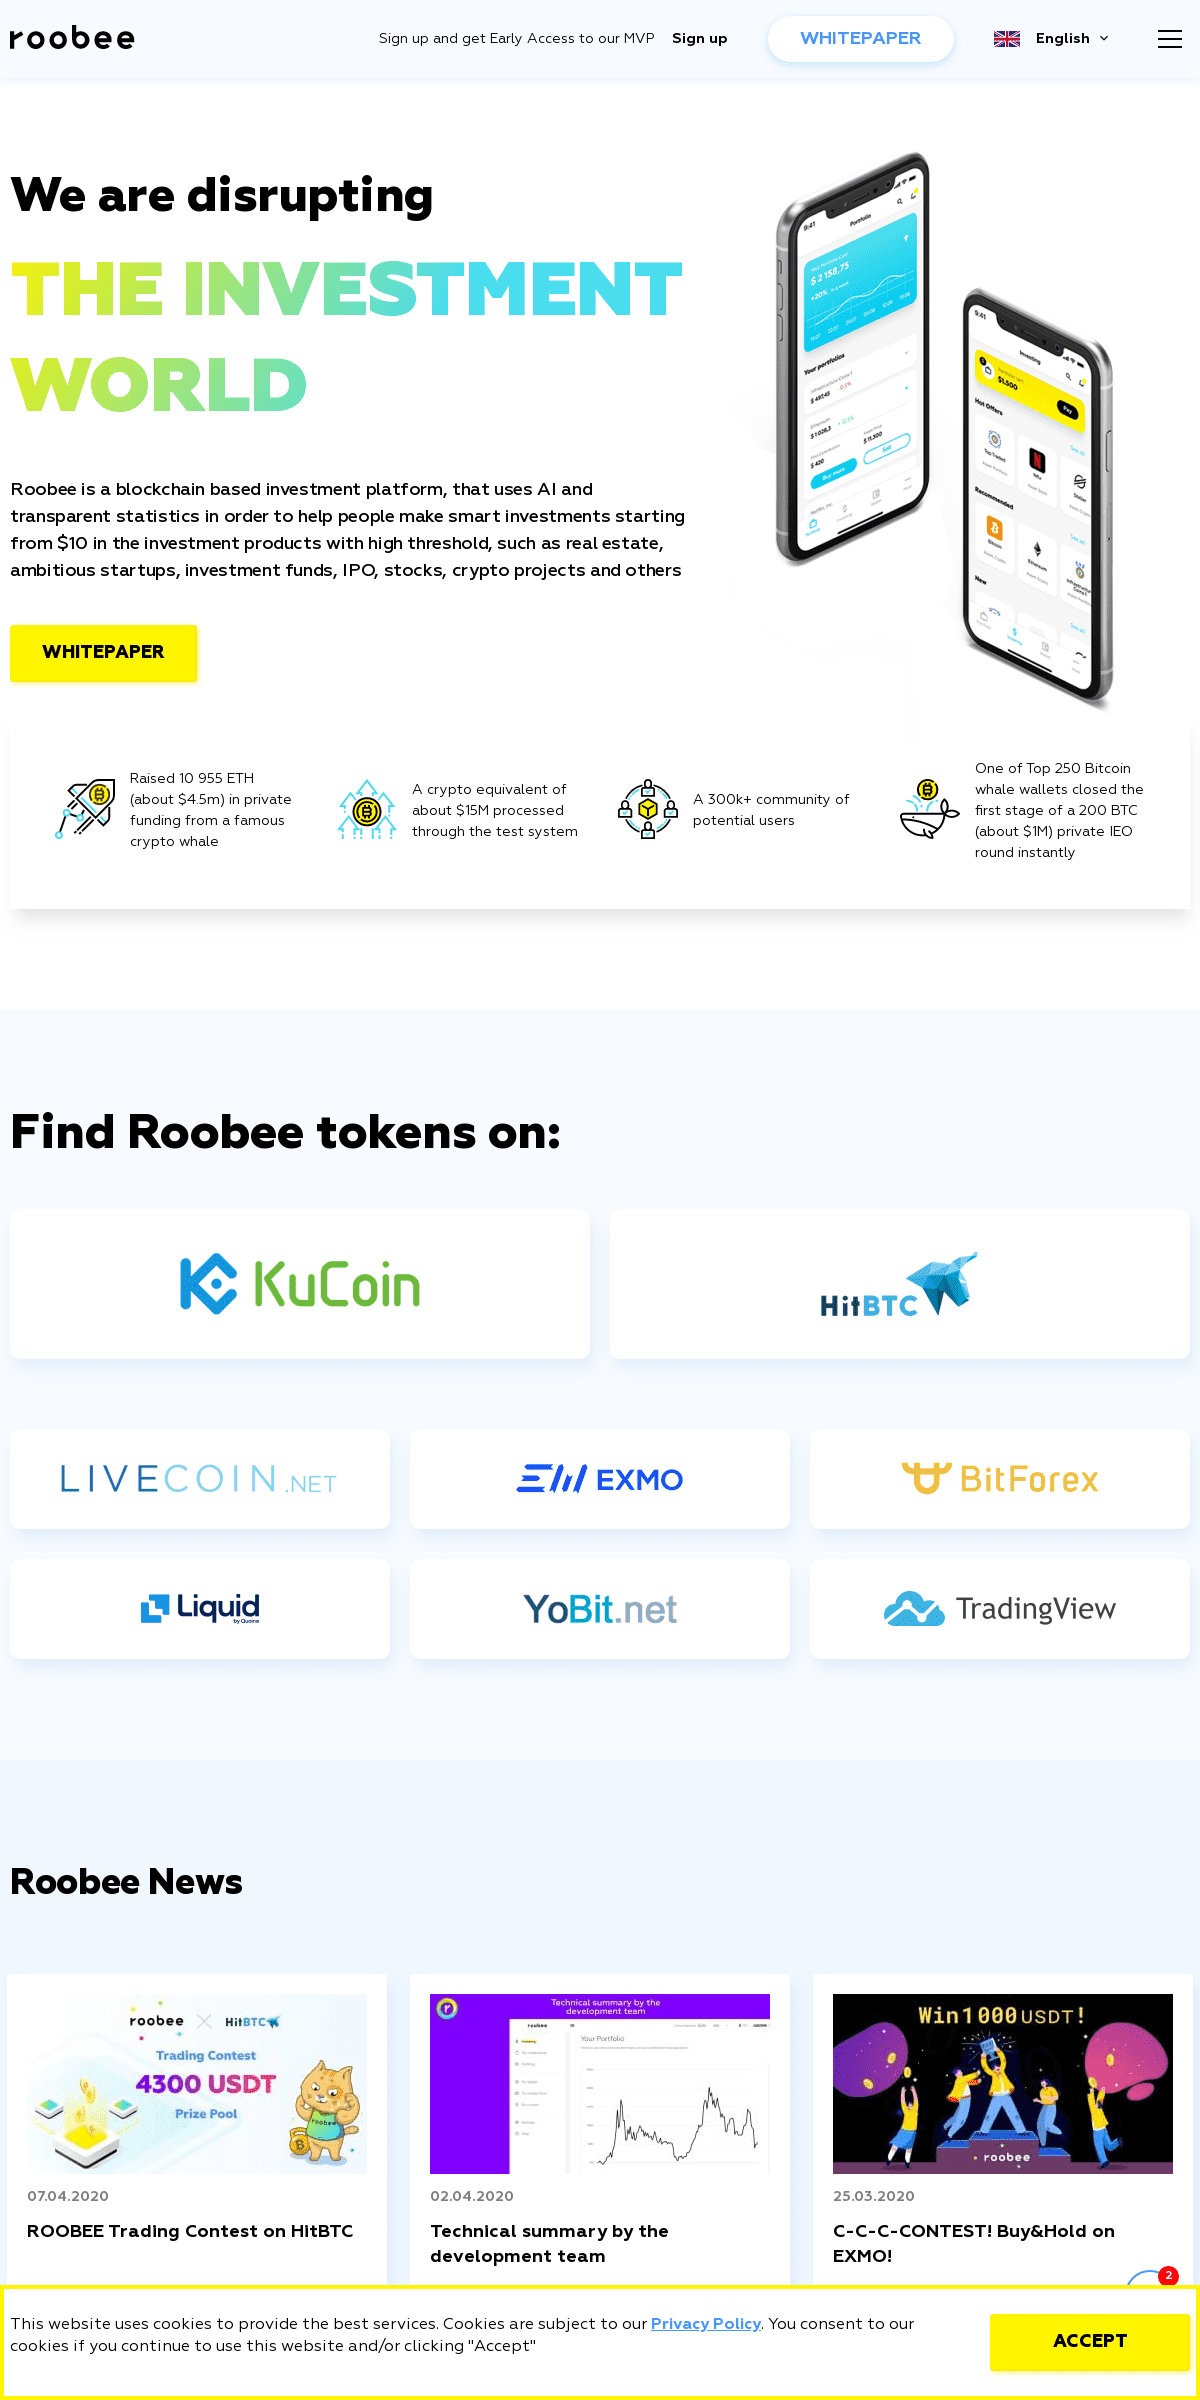 A complete backup of roobee.io